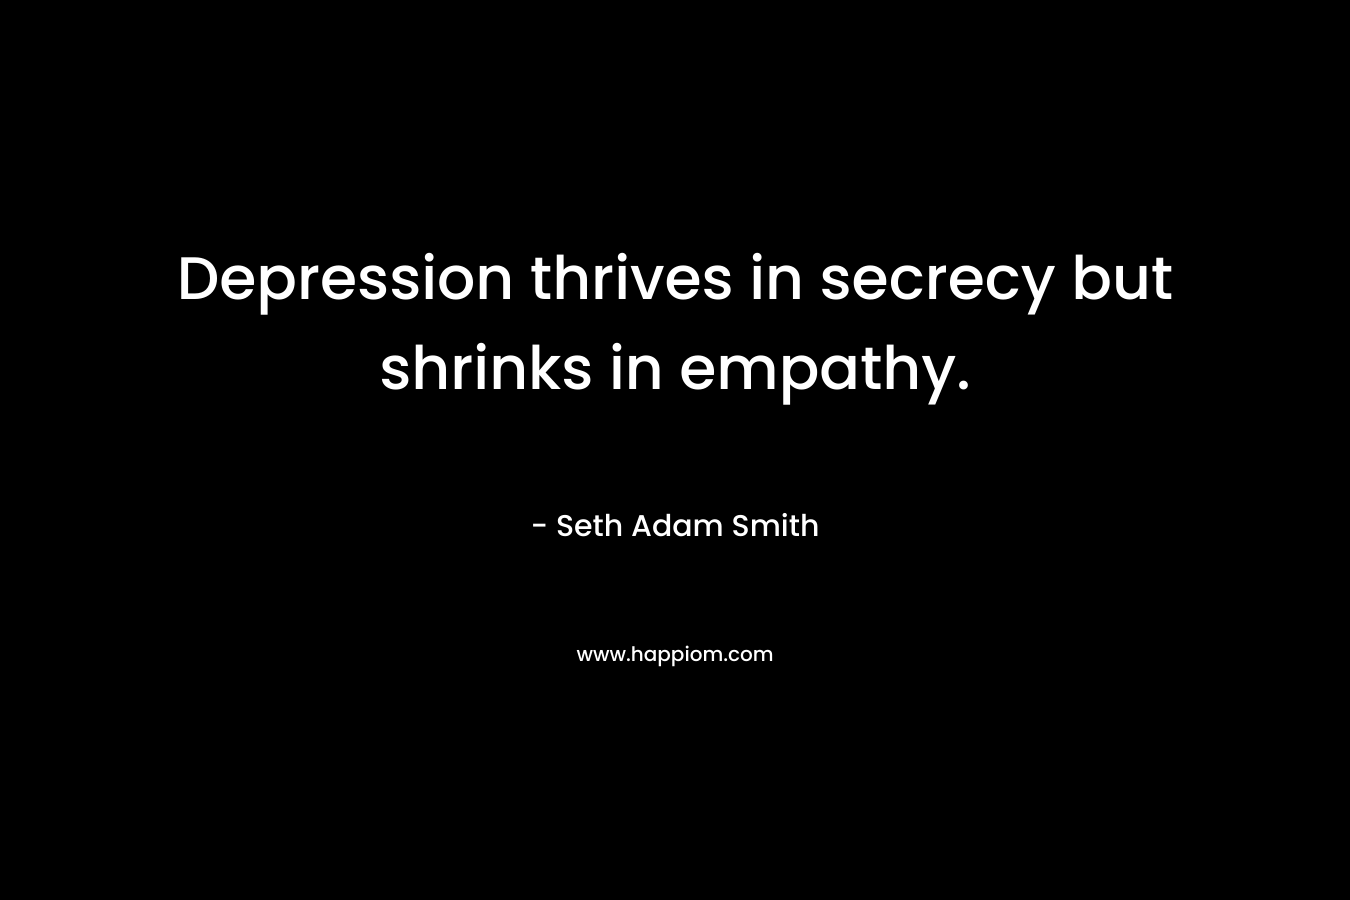 Depression thrives in secrecy but shrinks in empathy.